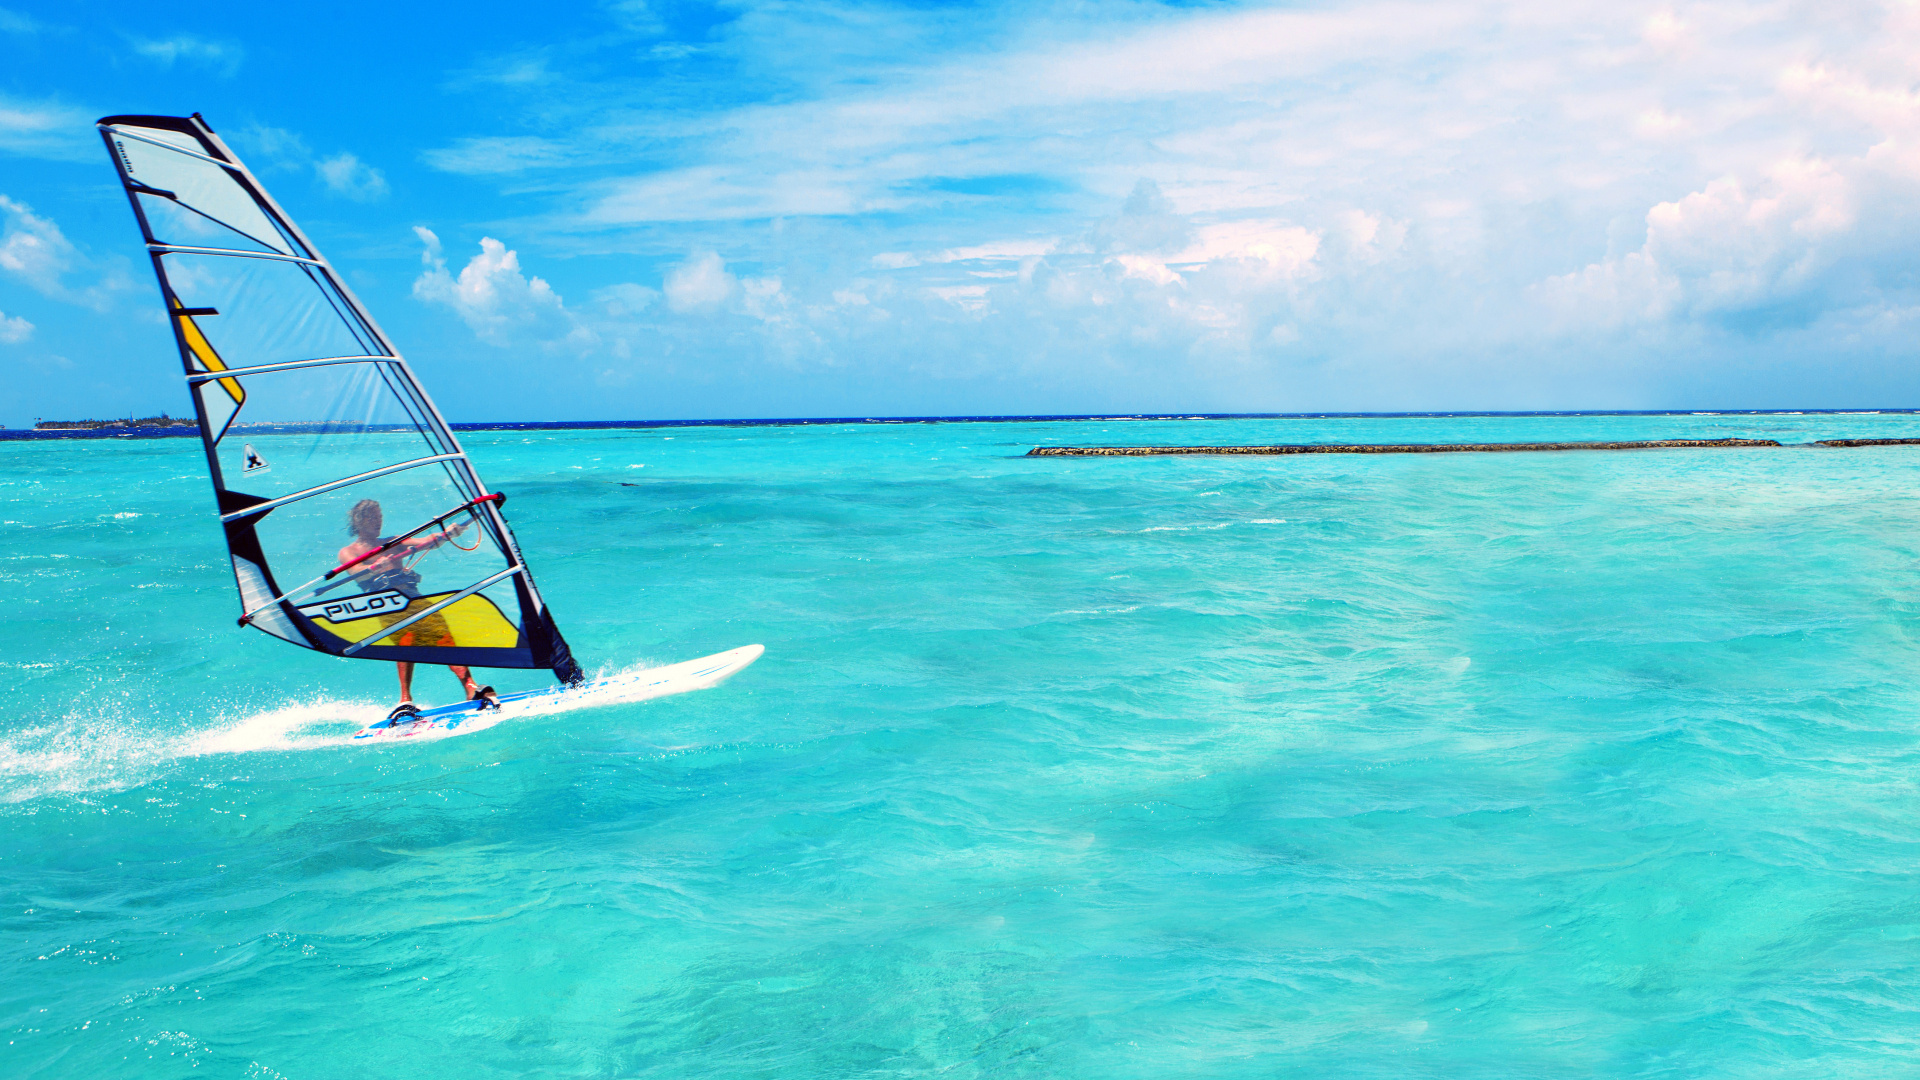 Yellow and White Sail Boat on Blue Sea Under Blue Sky During Daytime. Wallpaper in 1920x1080 Resolution